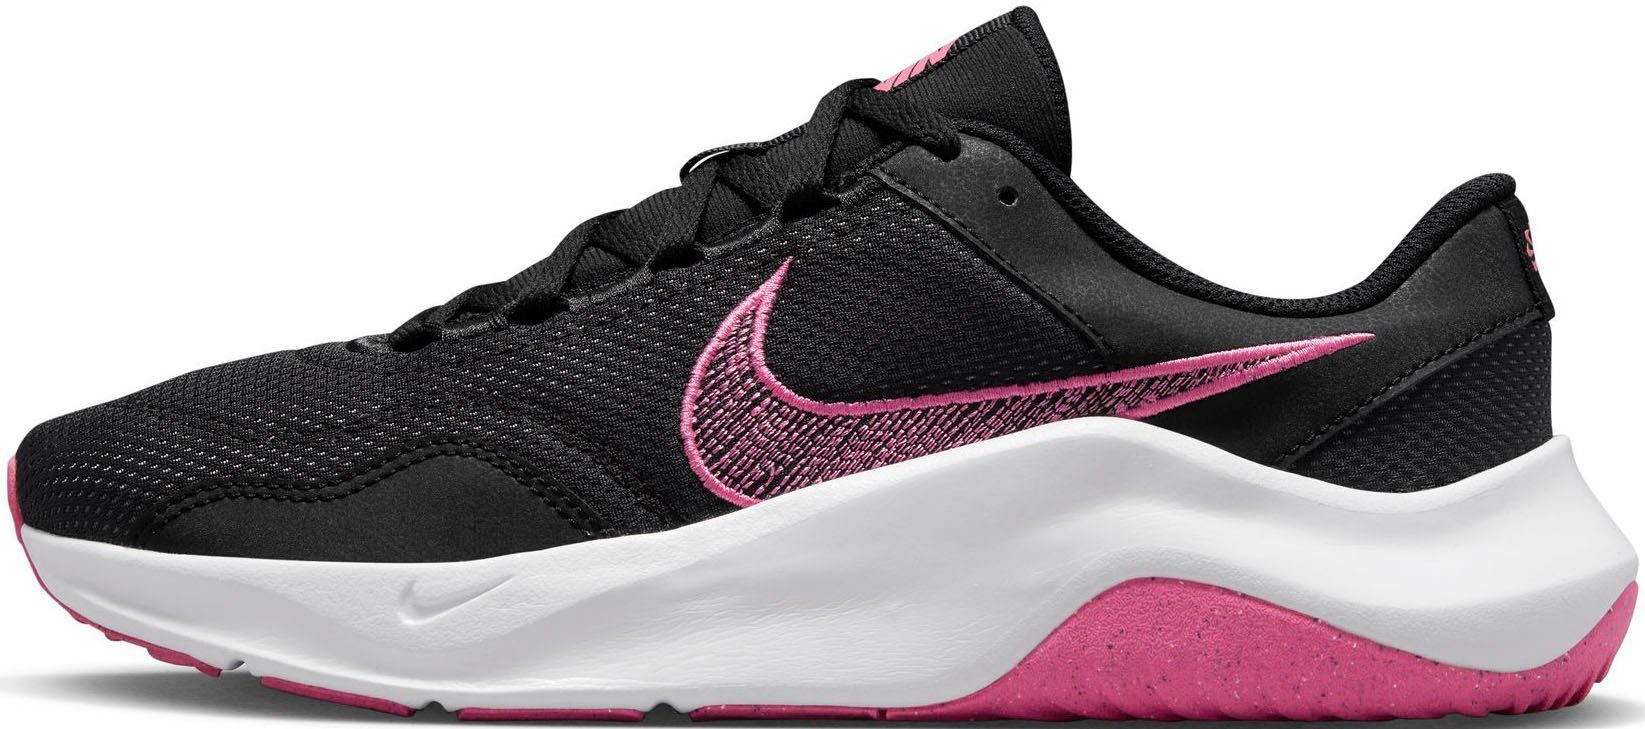 Nike LEGEND ESSENTIAL 3 Fitnessschuh BLACK-PINKSICLE-PARTICLE-GREY